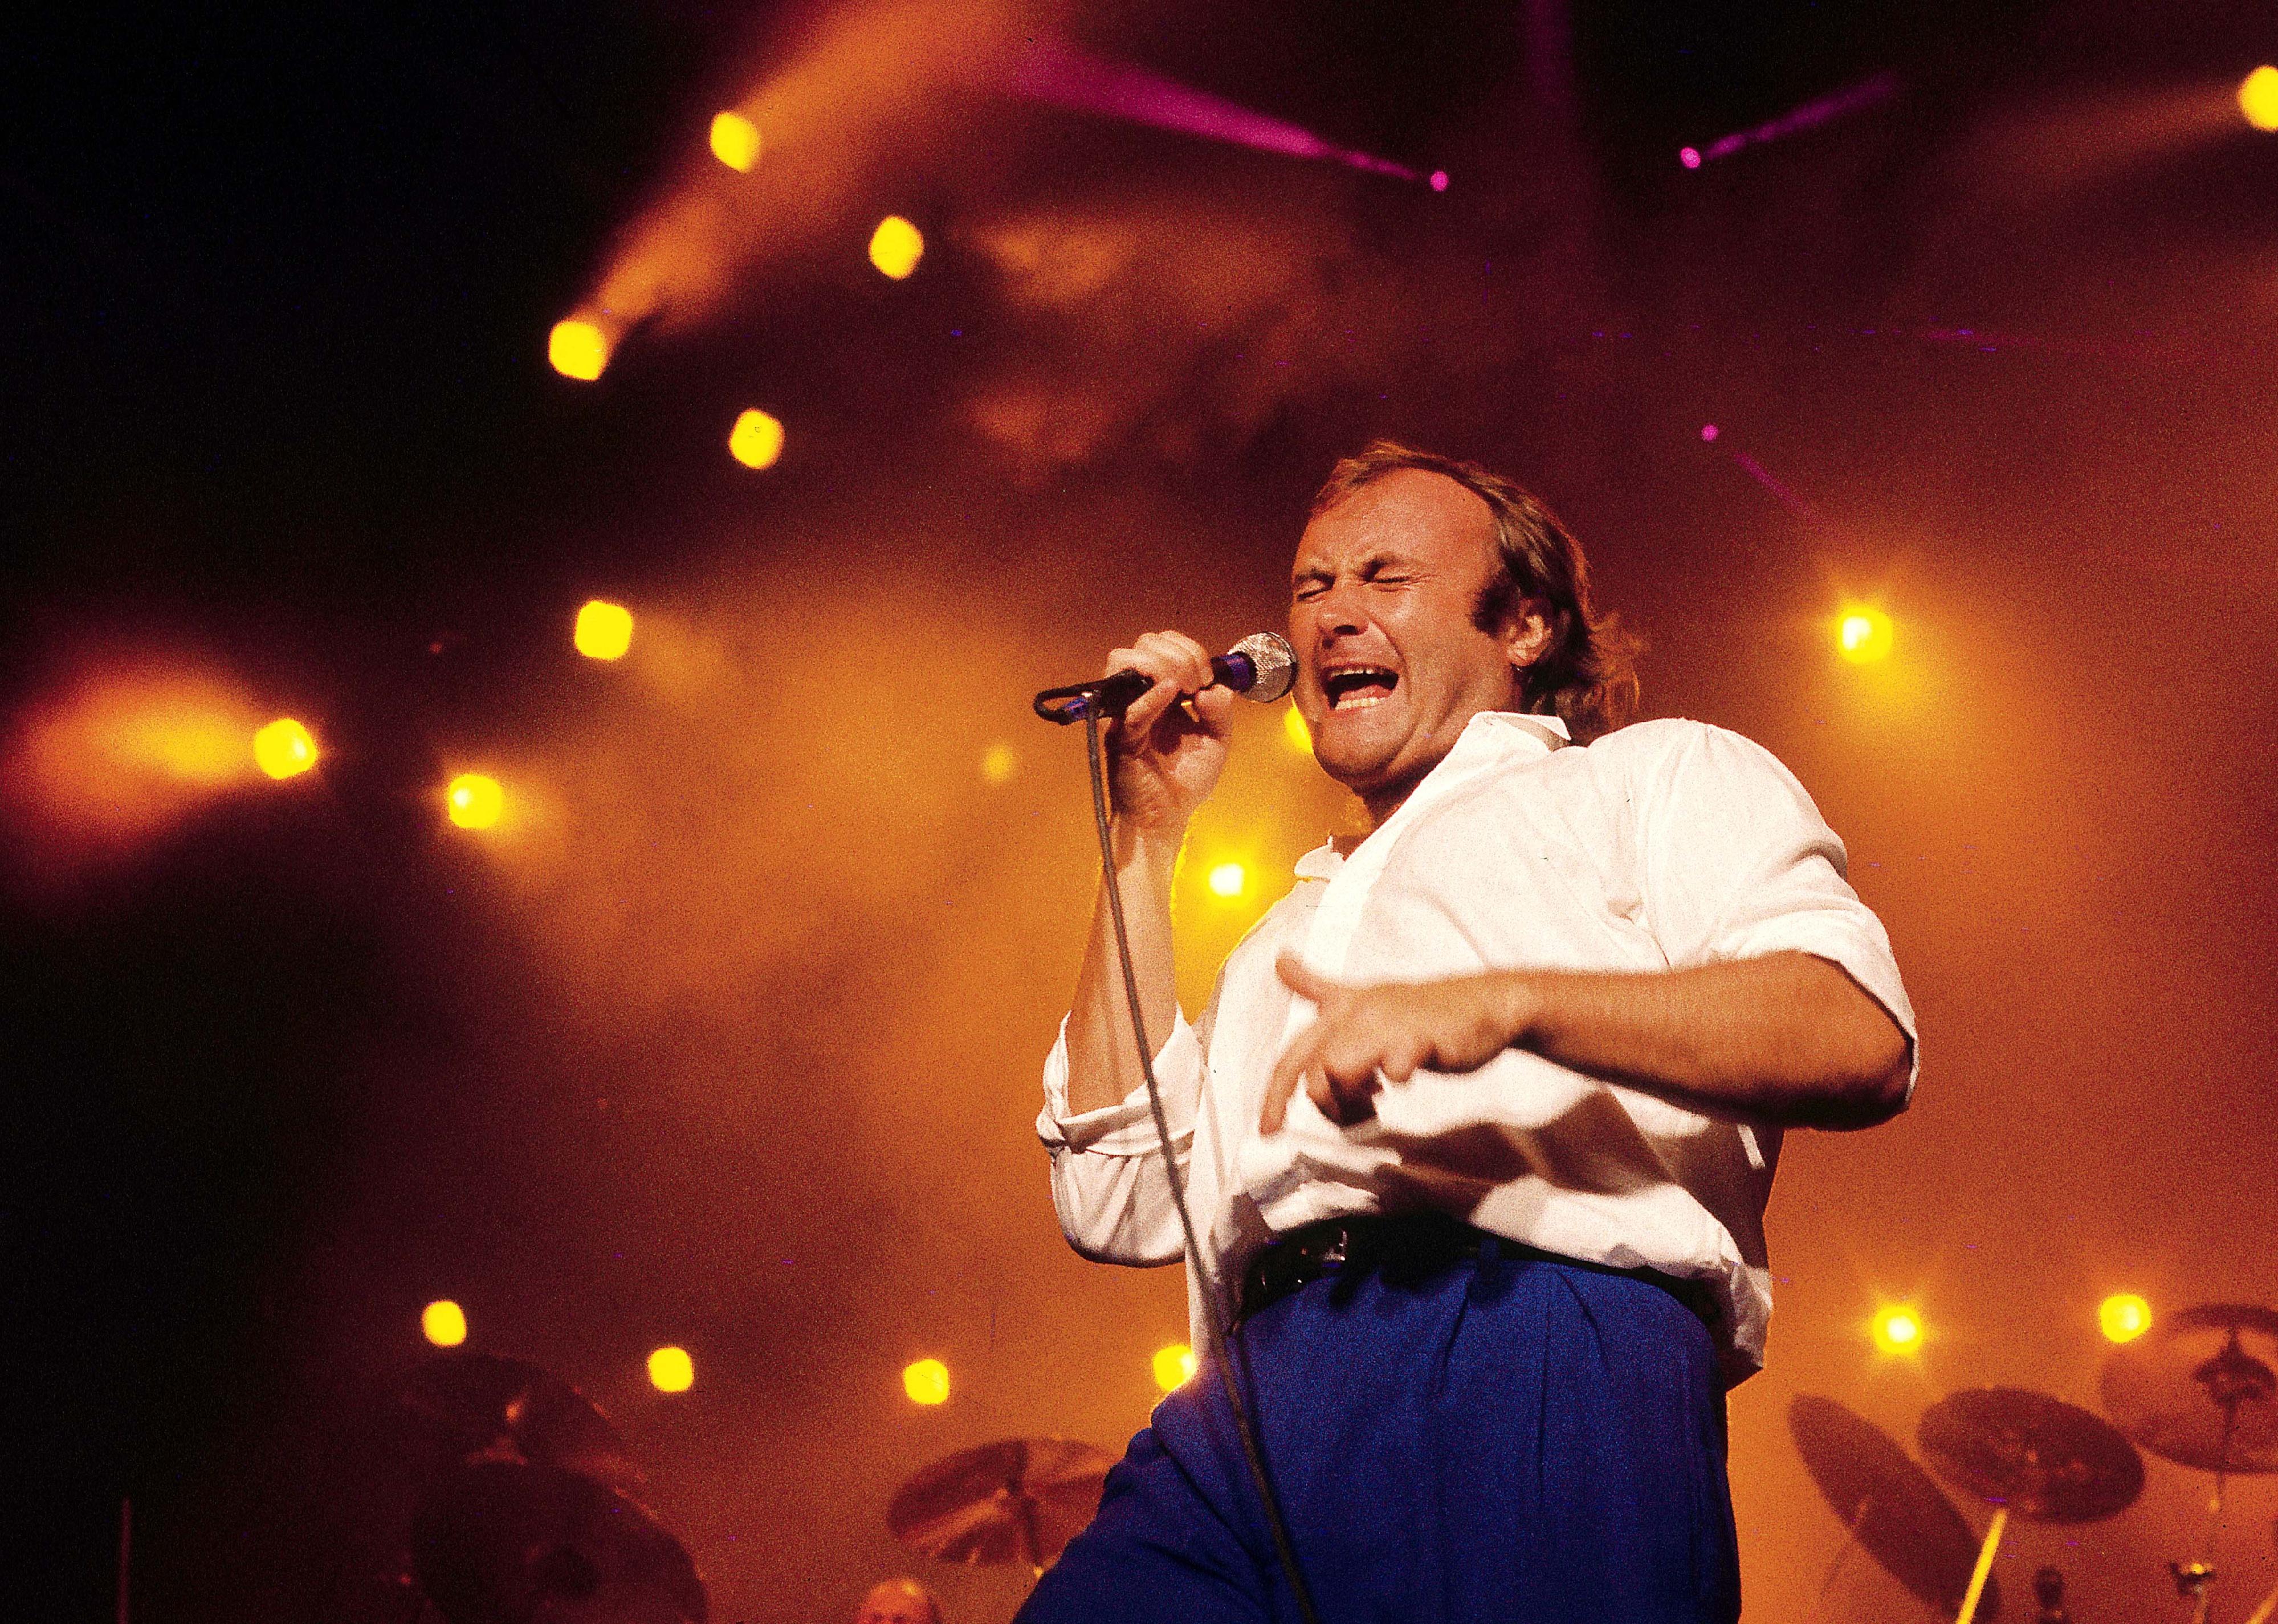 Phil Collins performing live on stage in Sydney, Australia.